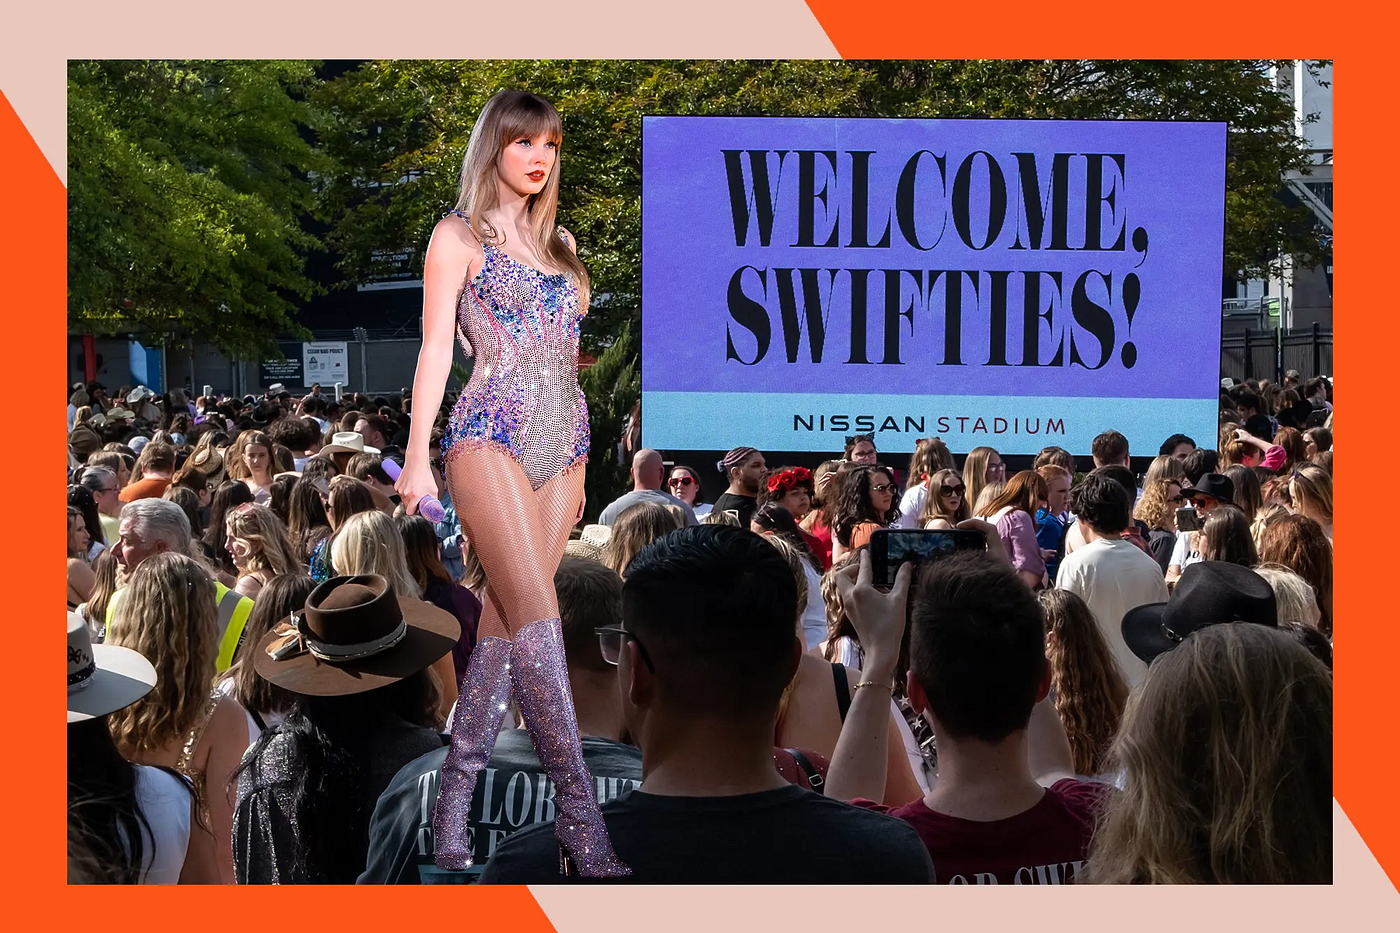 Why You're Still a “Swiftie”. Any person, especially a White woman